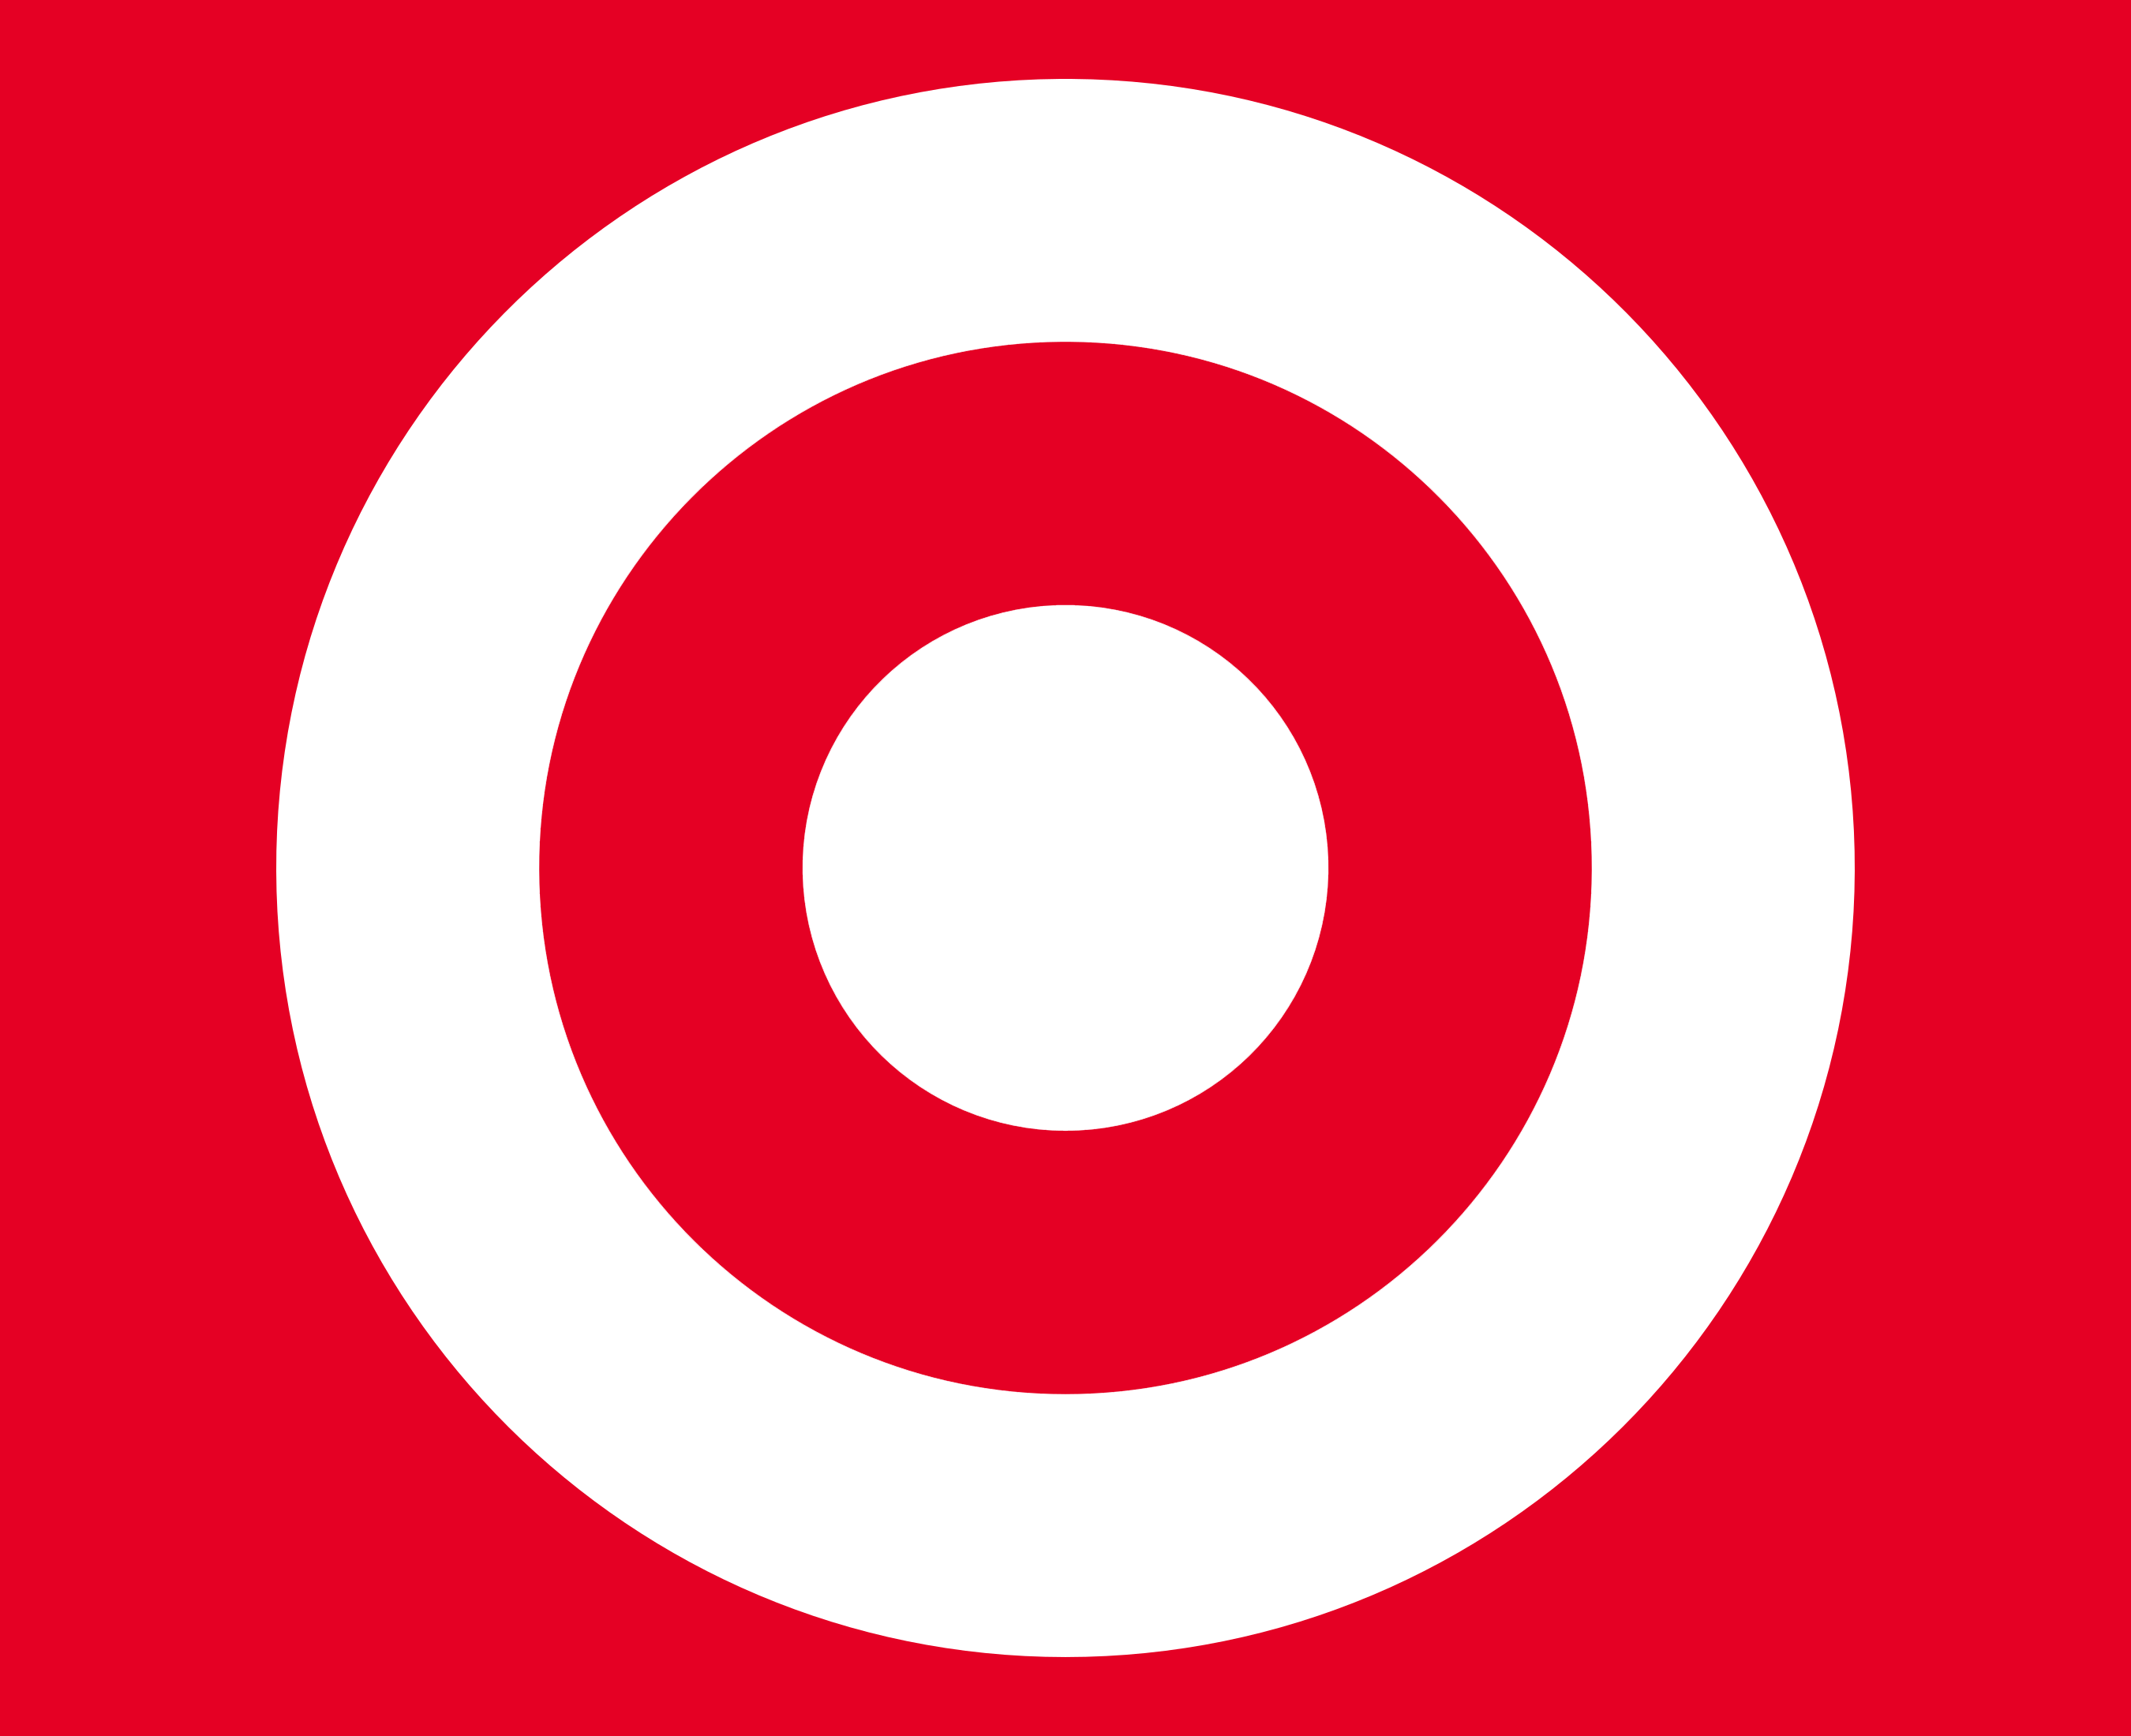 Target uses the Red background instead of White?